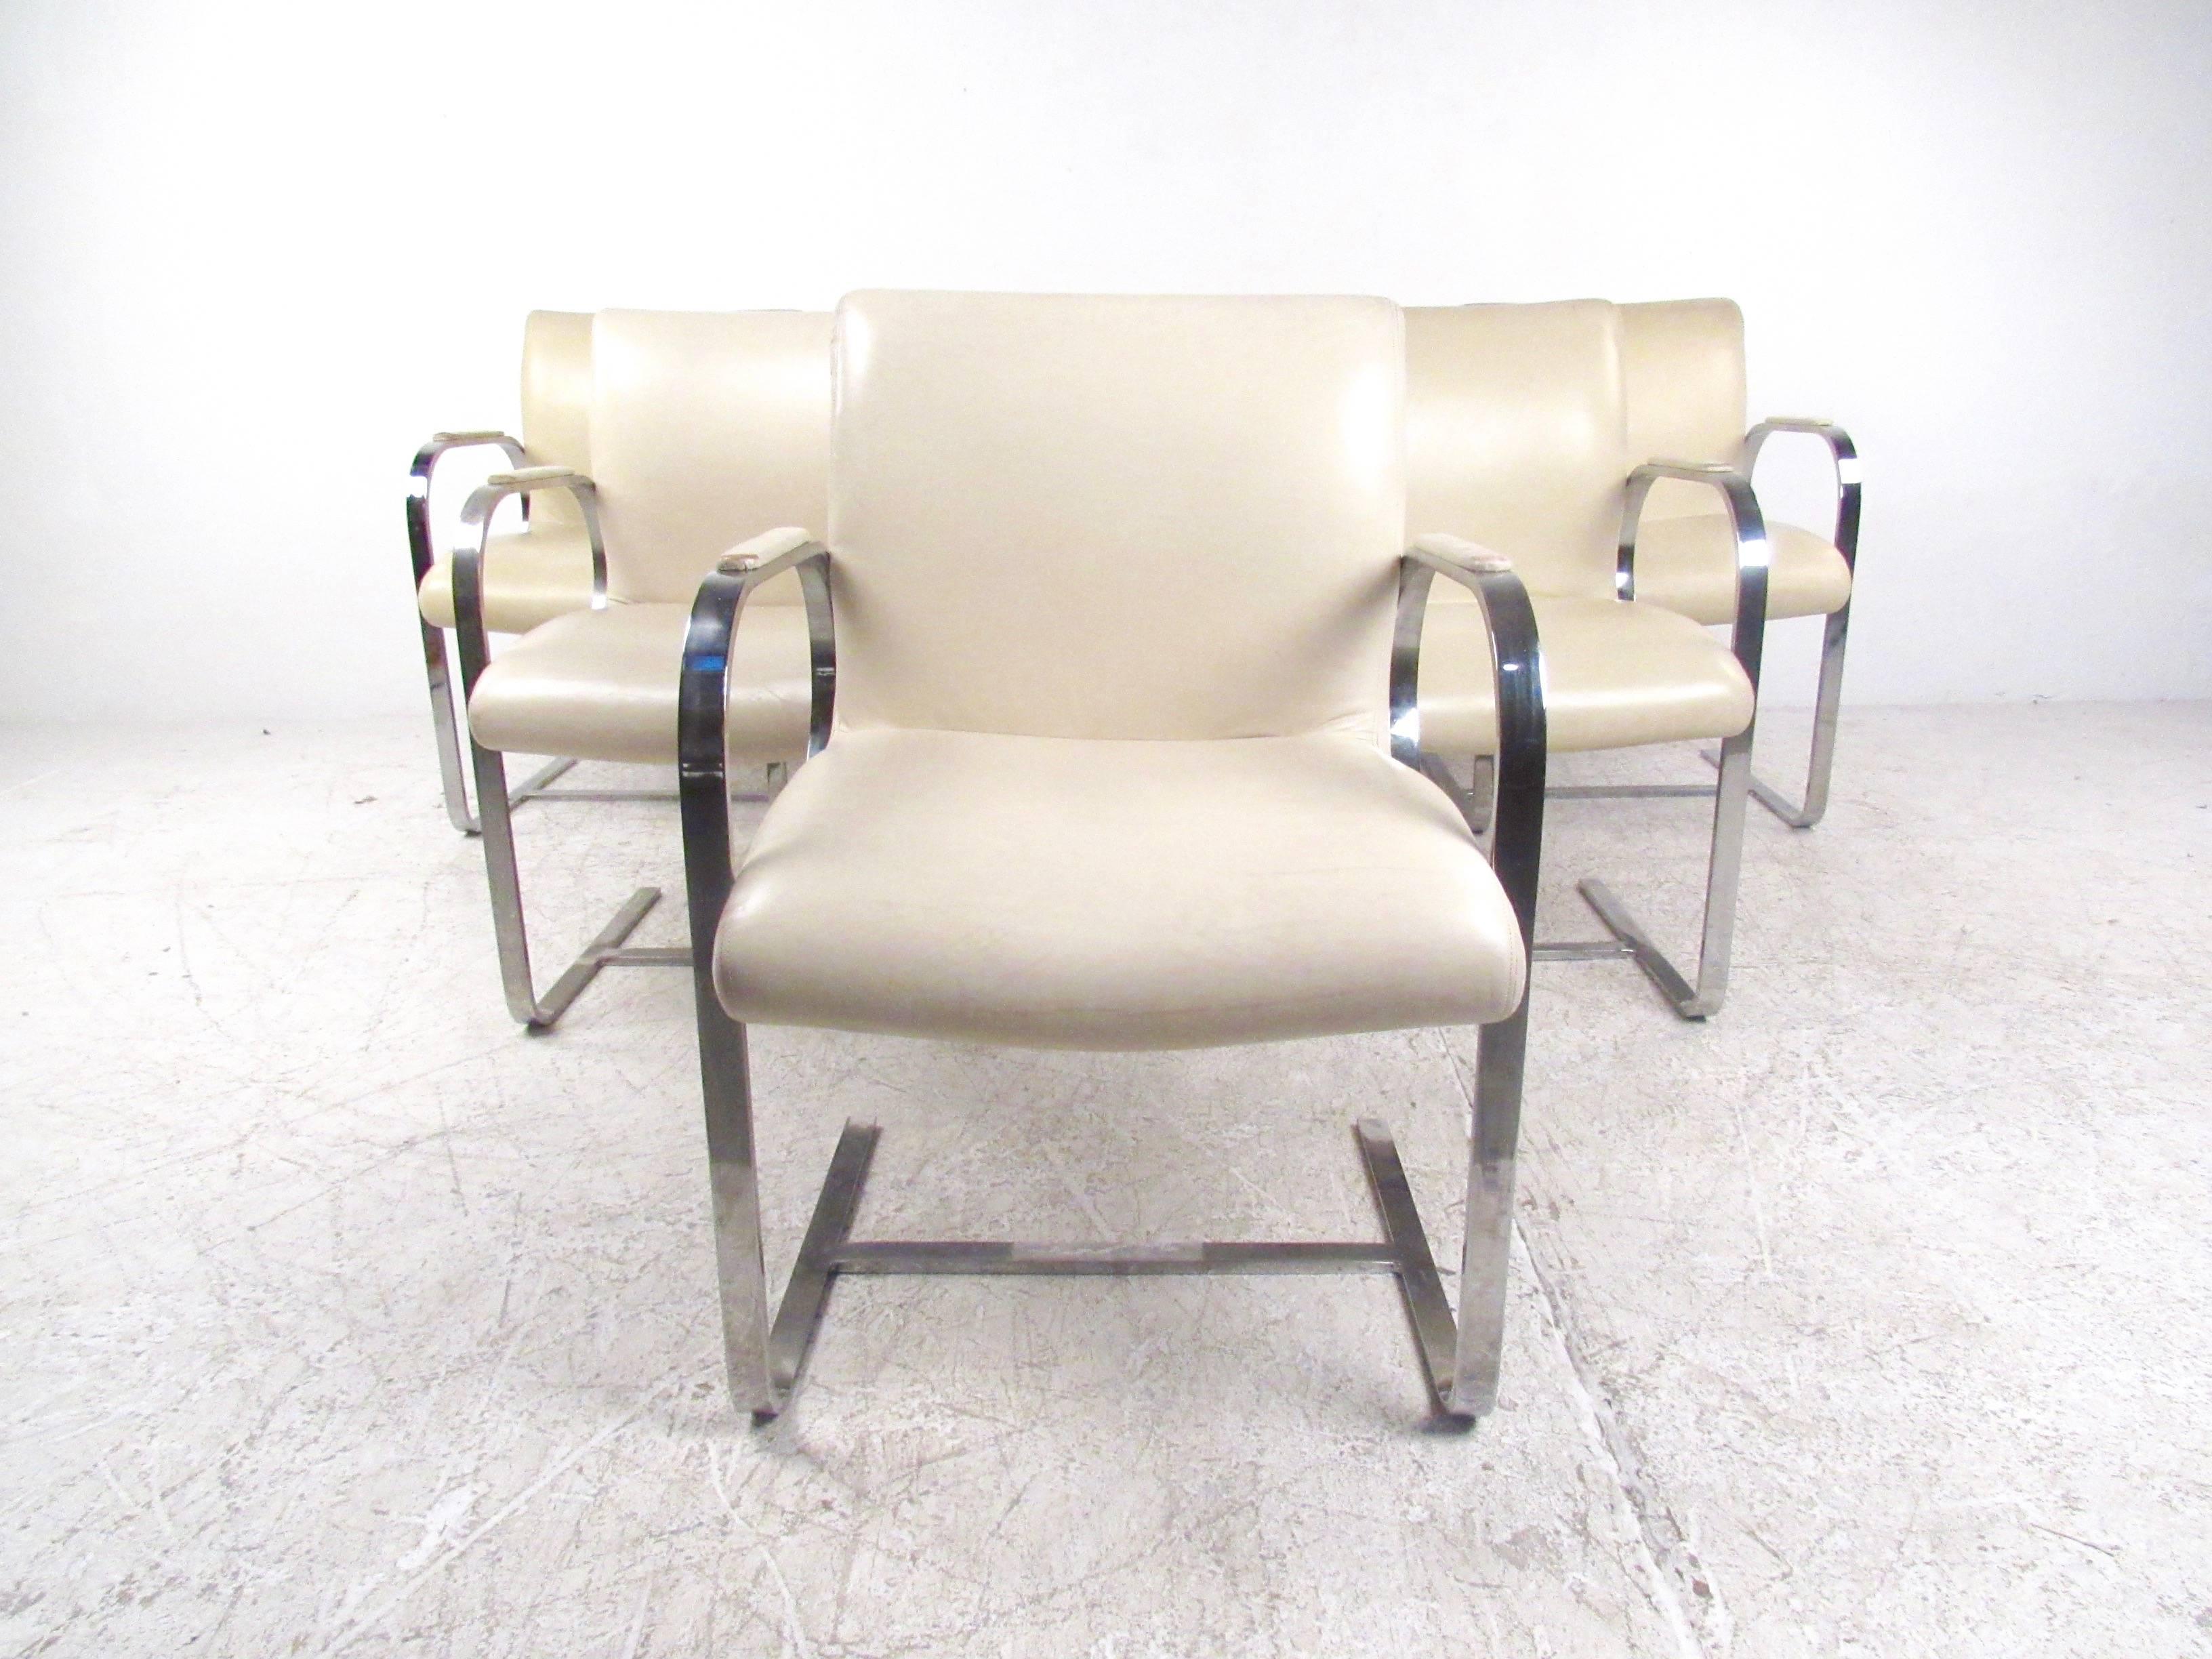 American Mid-Century Modern Mies van der Rohe Brno Style Dining Chairs For Sale